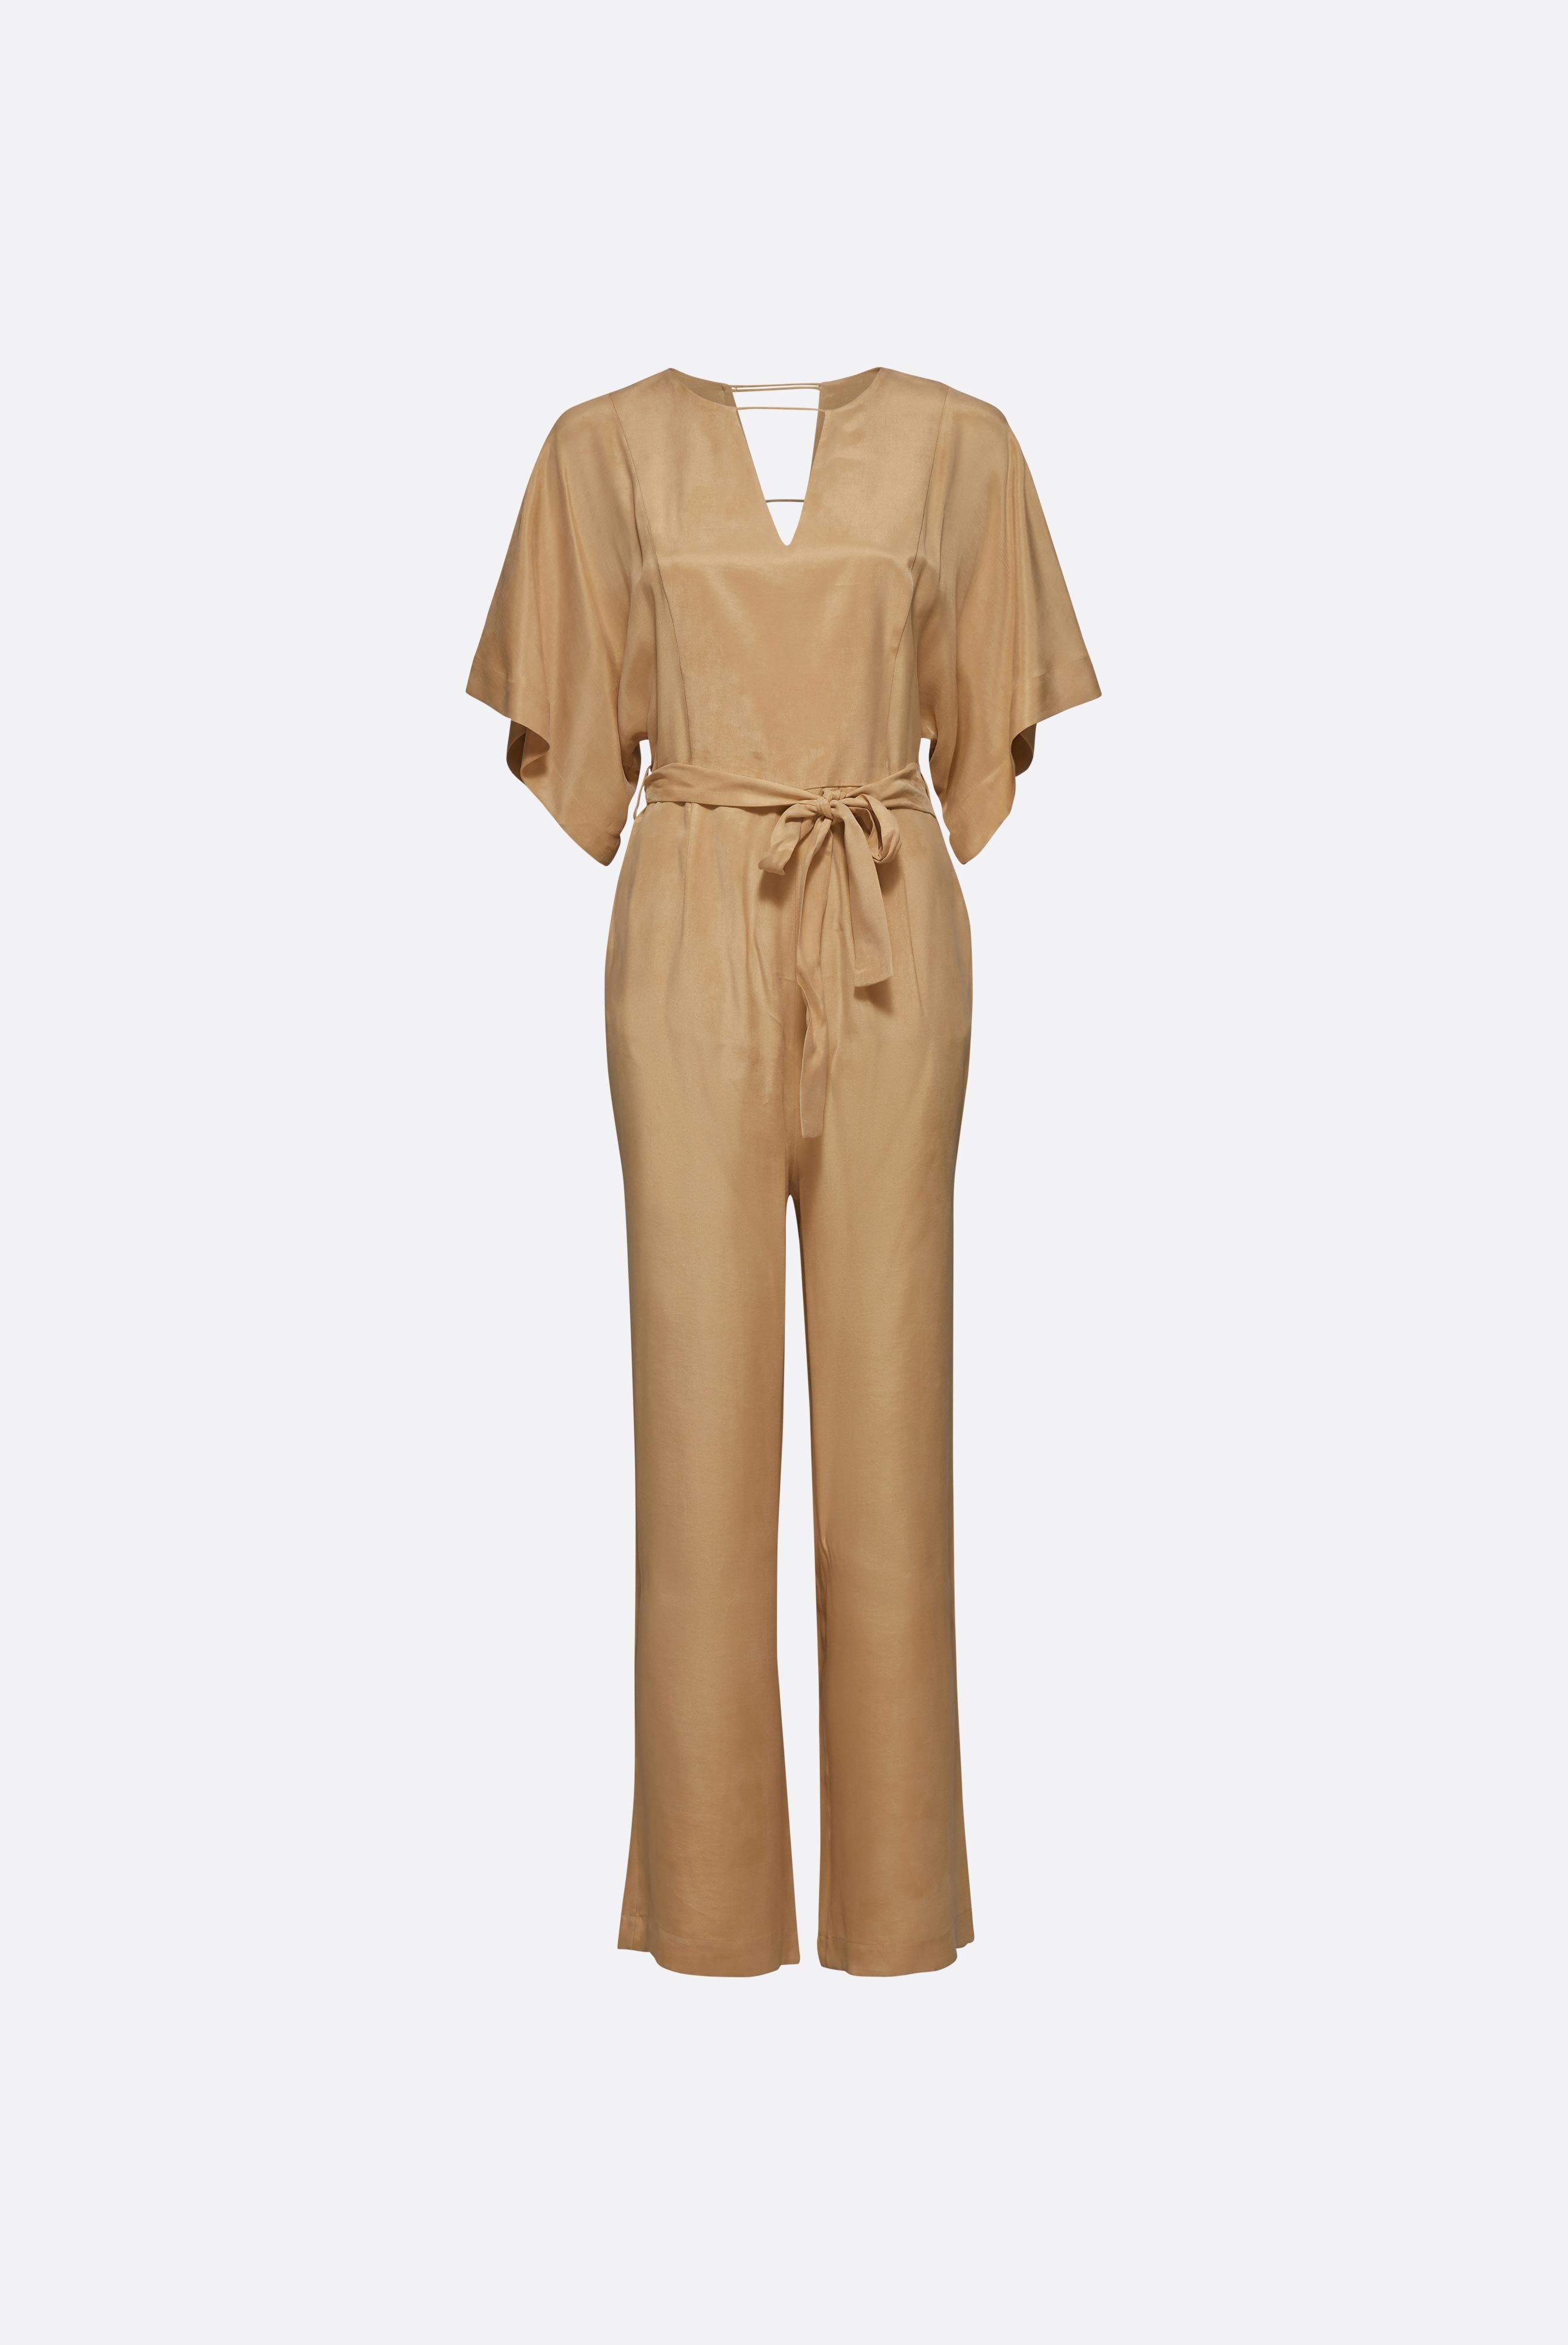 Jeans & Trousers+Jumpsuit with wide Sleeves+05.658Q.22.155007.250.32